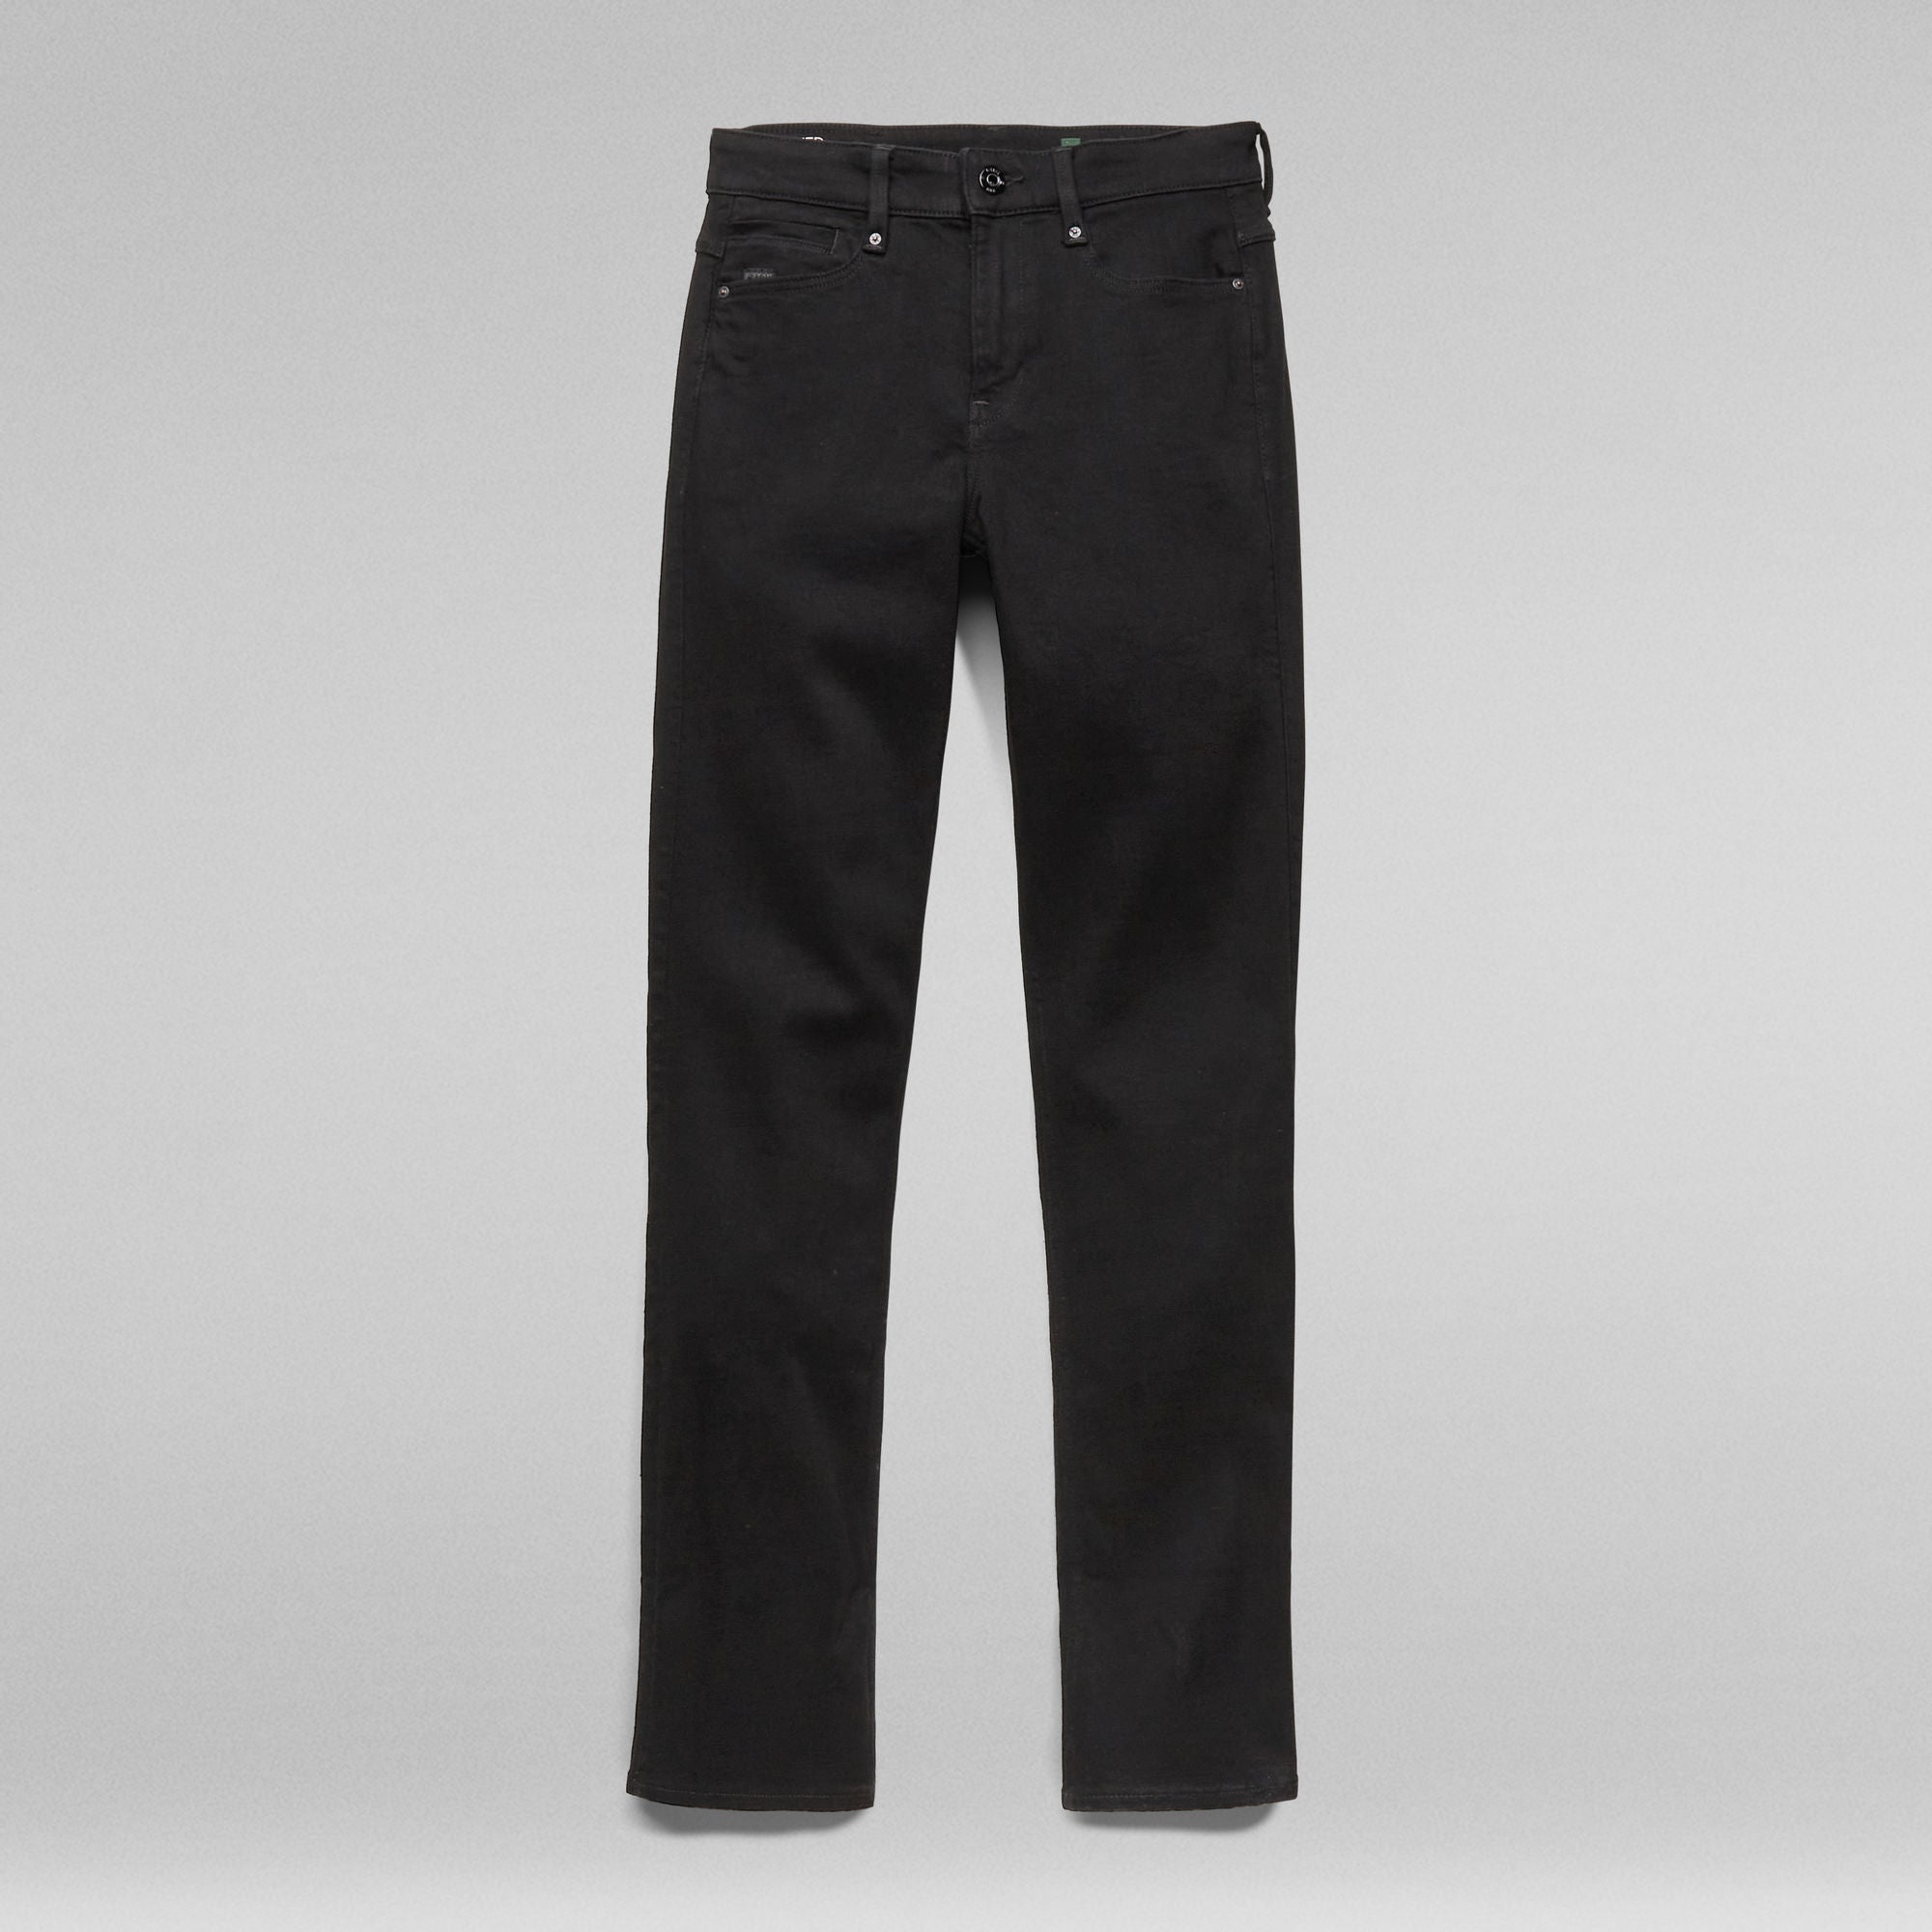 G-Star Raw - Noxer Straight Jeans - Pitch Black